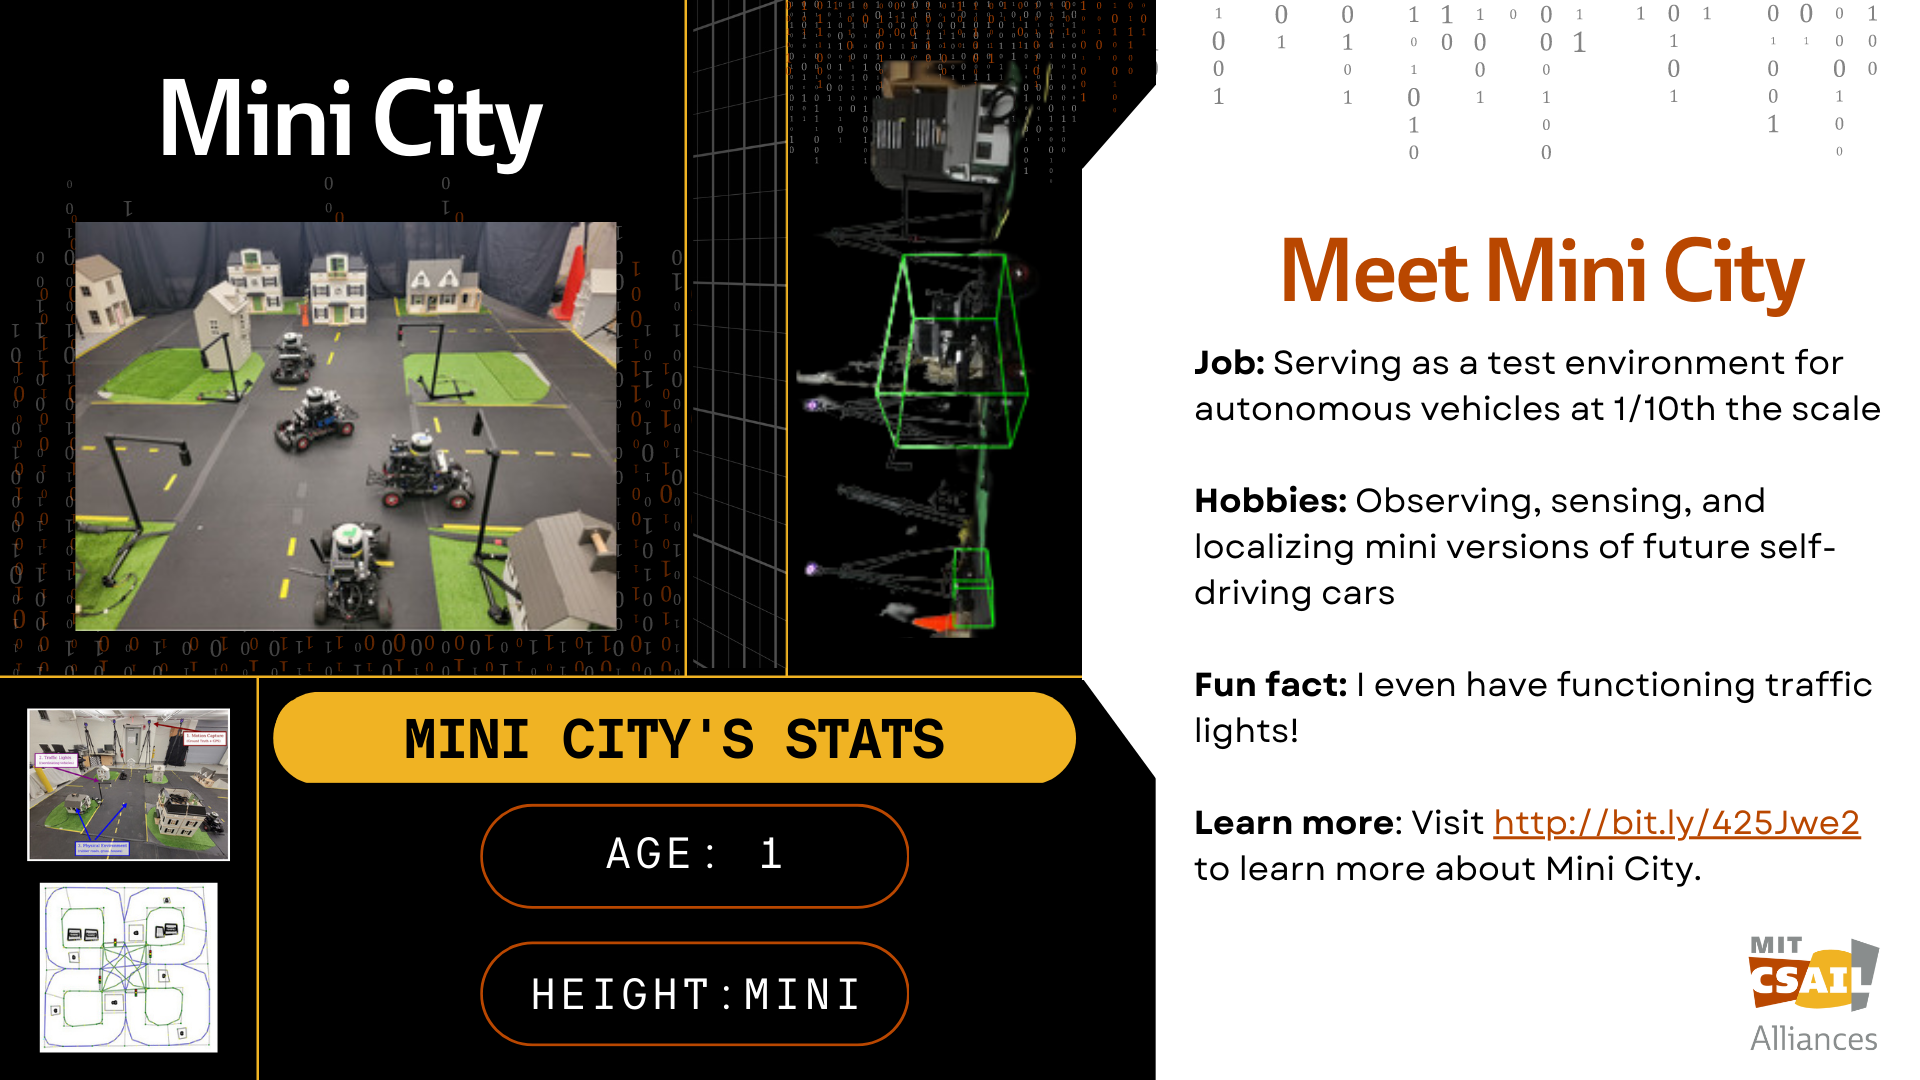 MiniCity robot collage; with text that reads "Mini City"